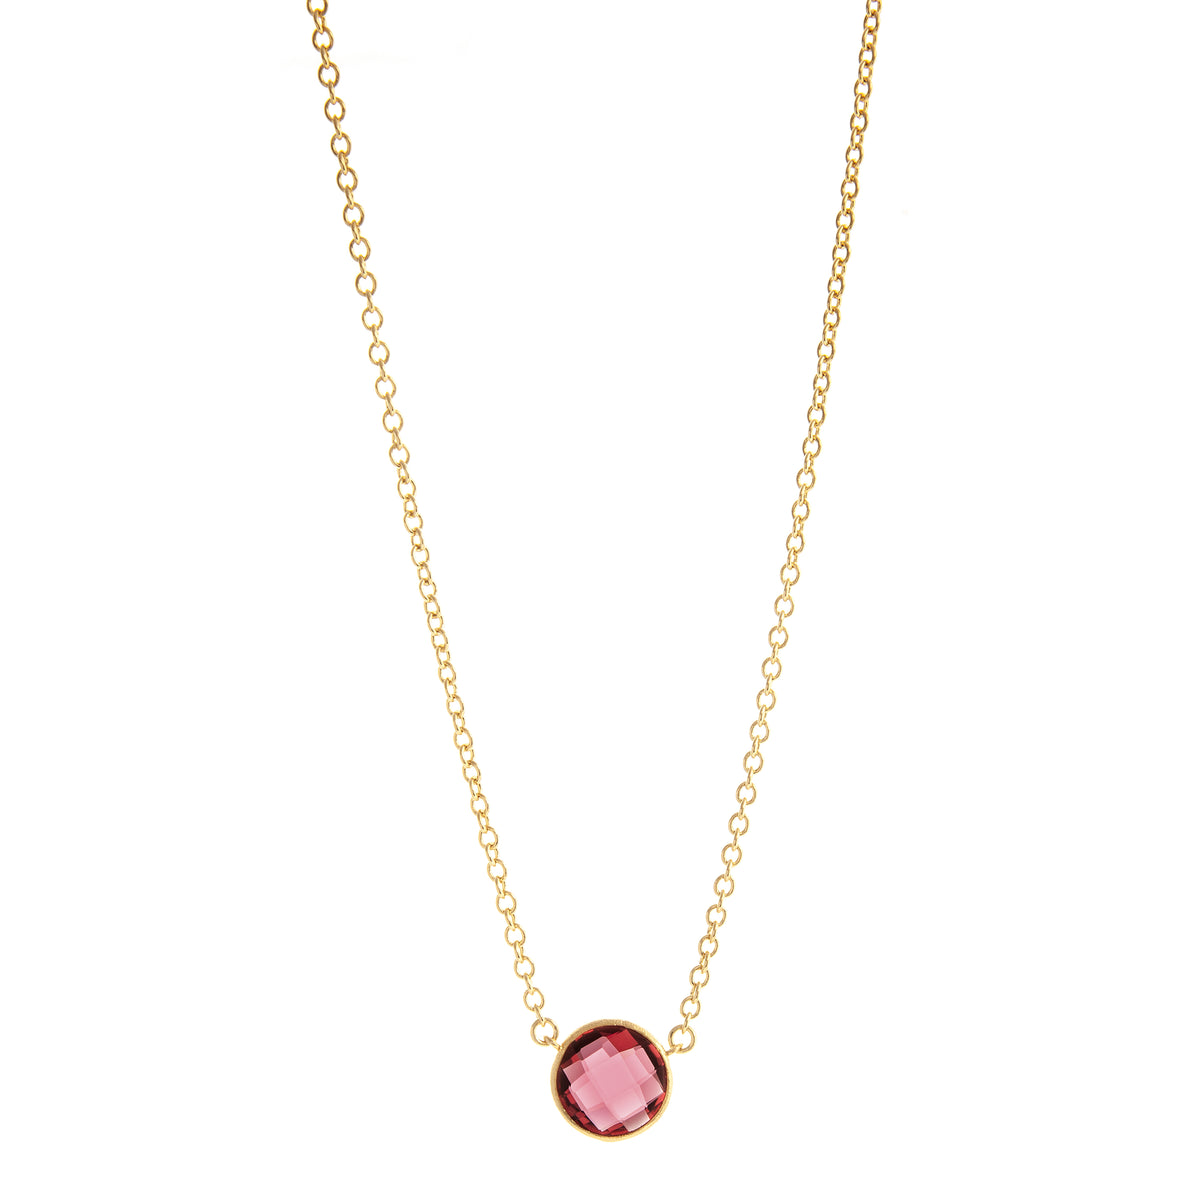 Round Faceted Rubellite Crystal Pendant – Rivka Friedman Jewelry